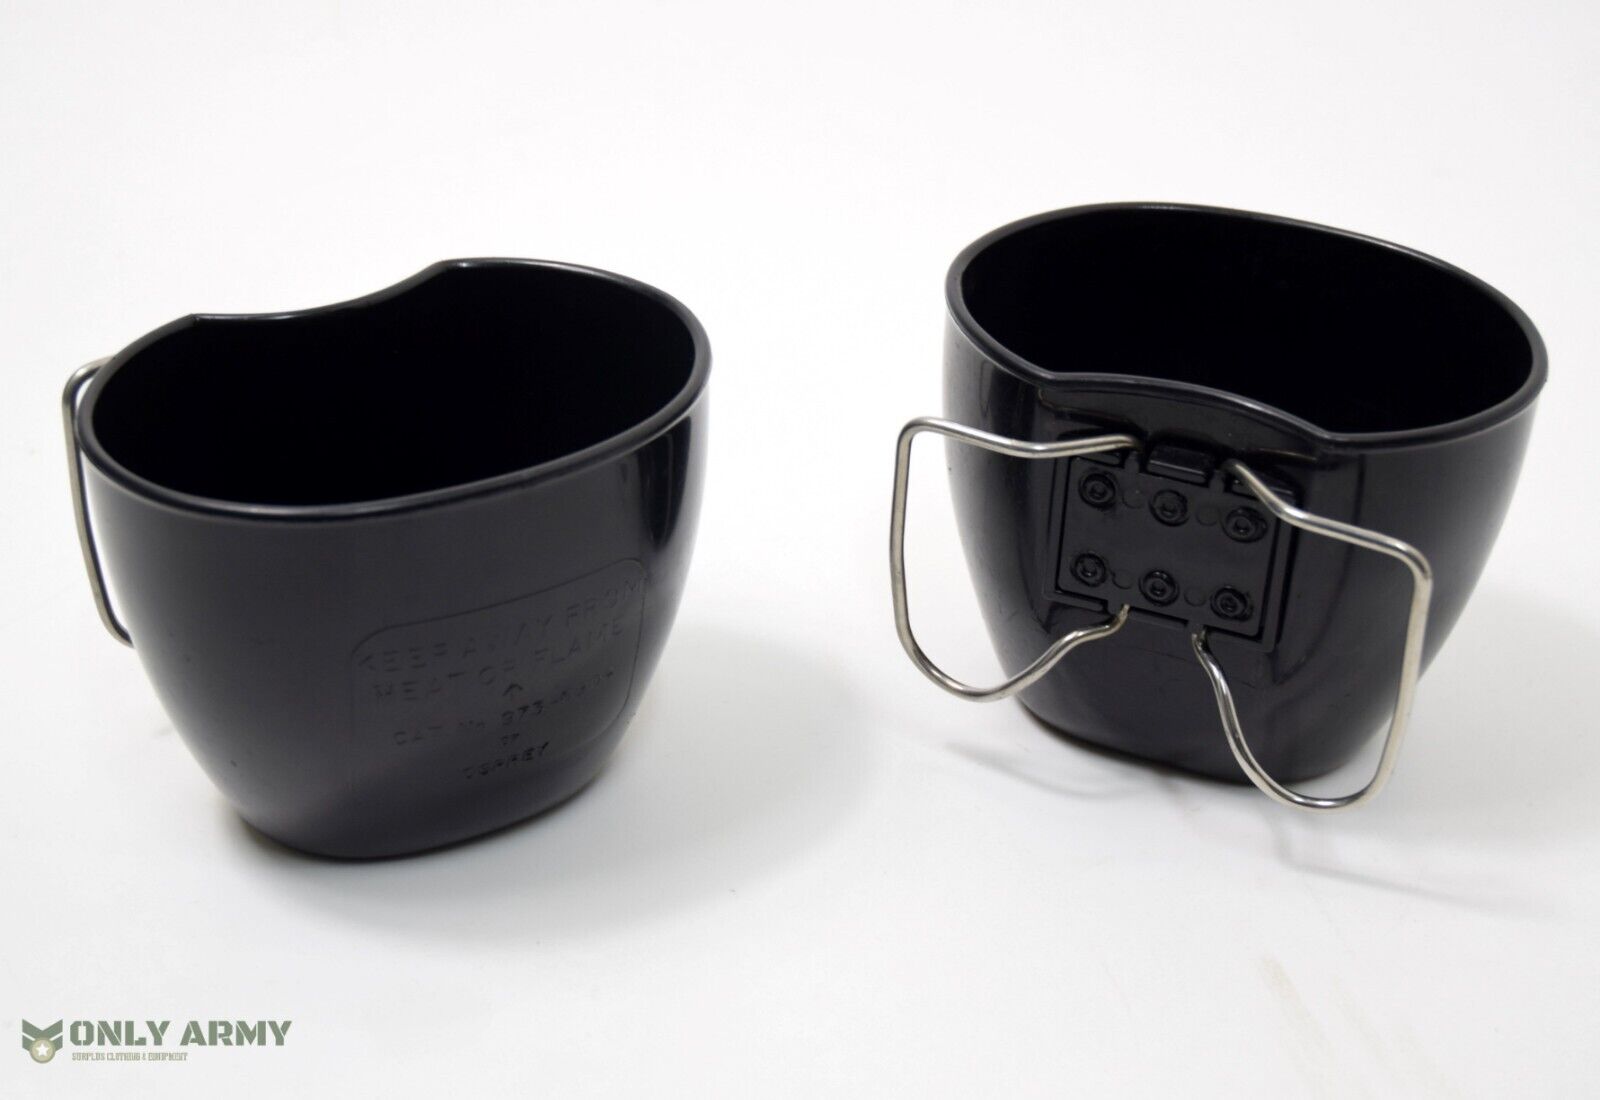 British Army Used Osprey Cup Water Canteen 58 pattern Black Mug Camping Drinking